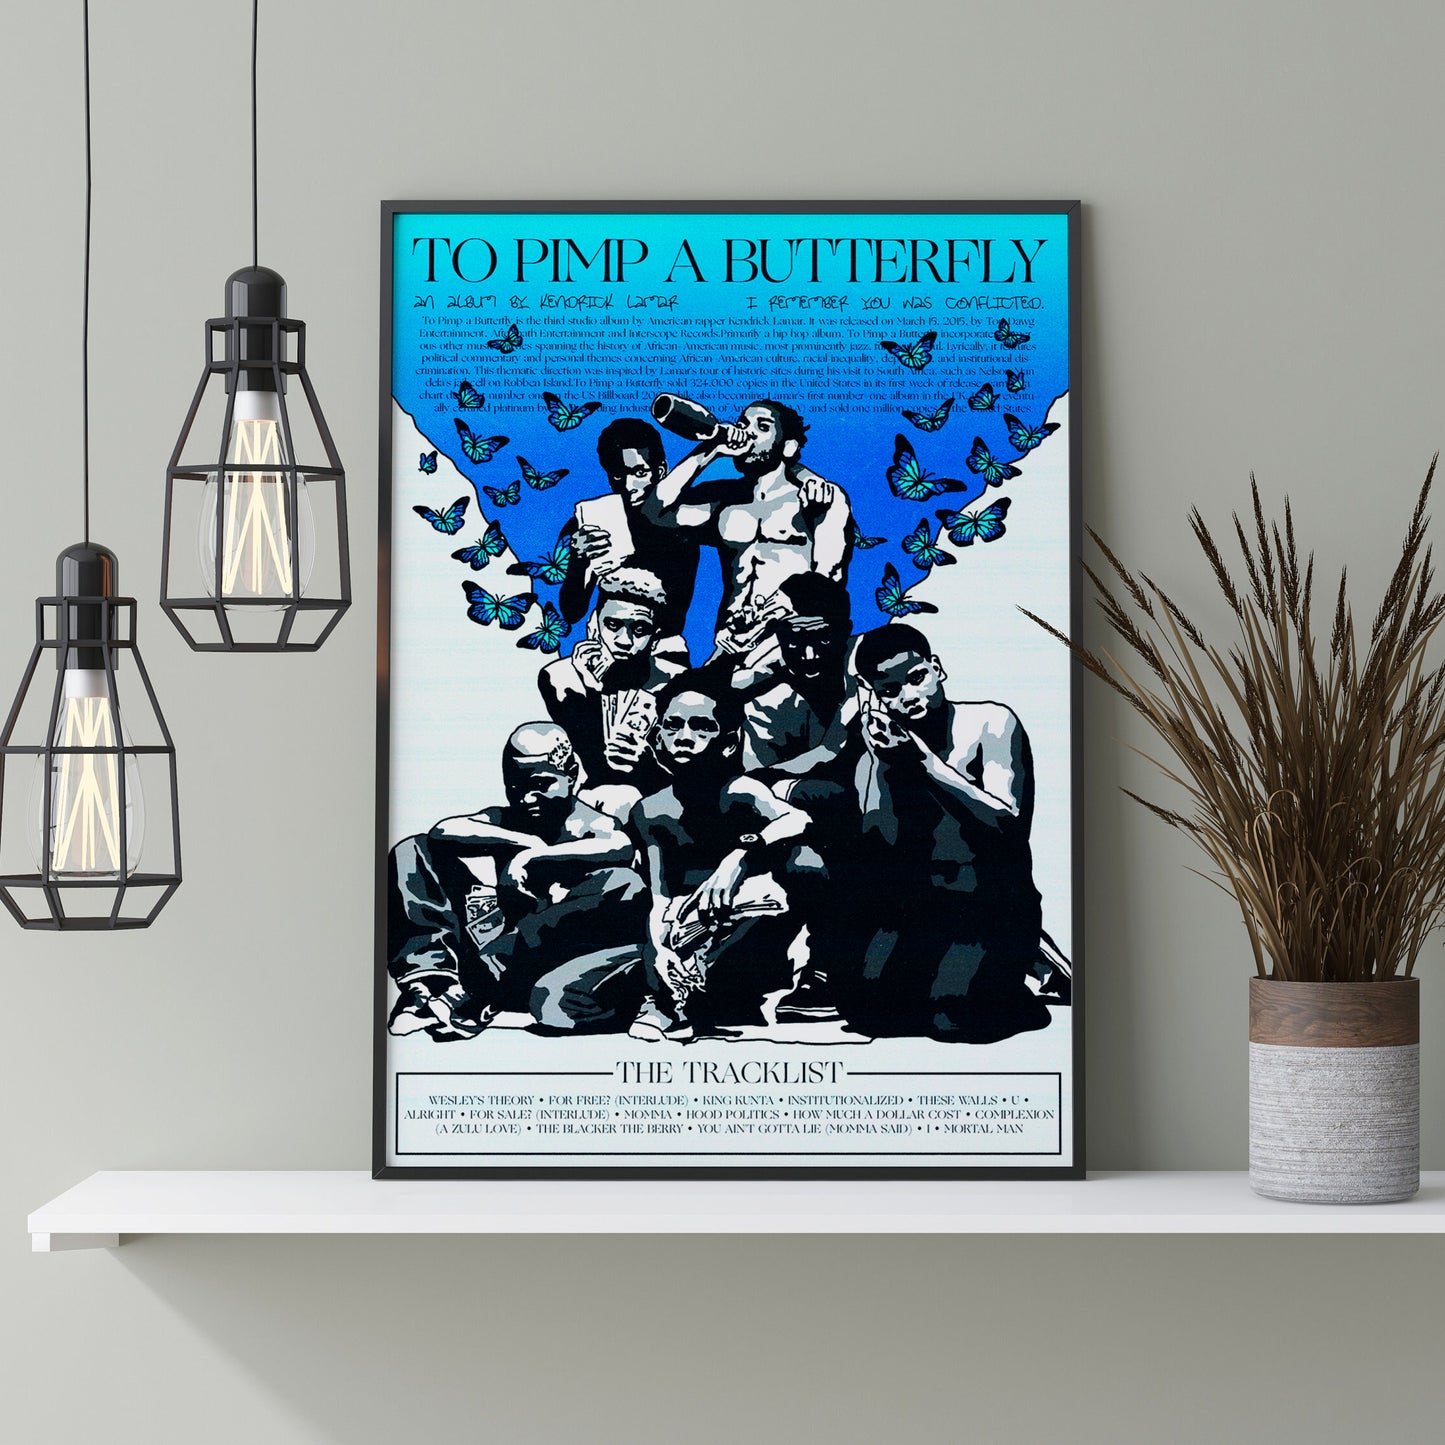 KENDRICK'S BUTTERFLY (RETRO) POSTER